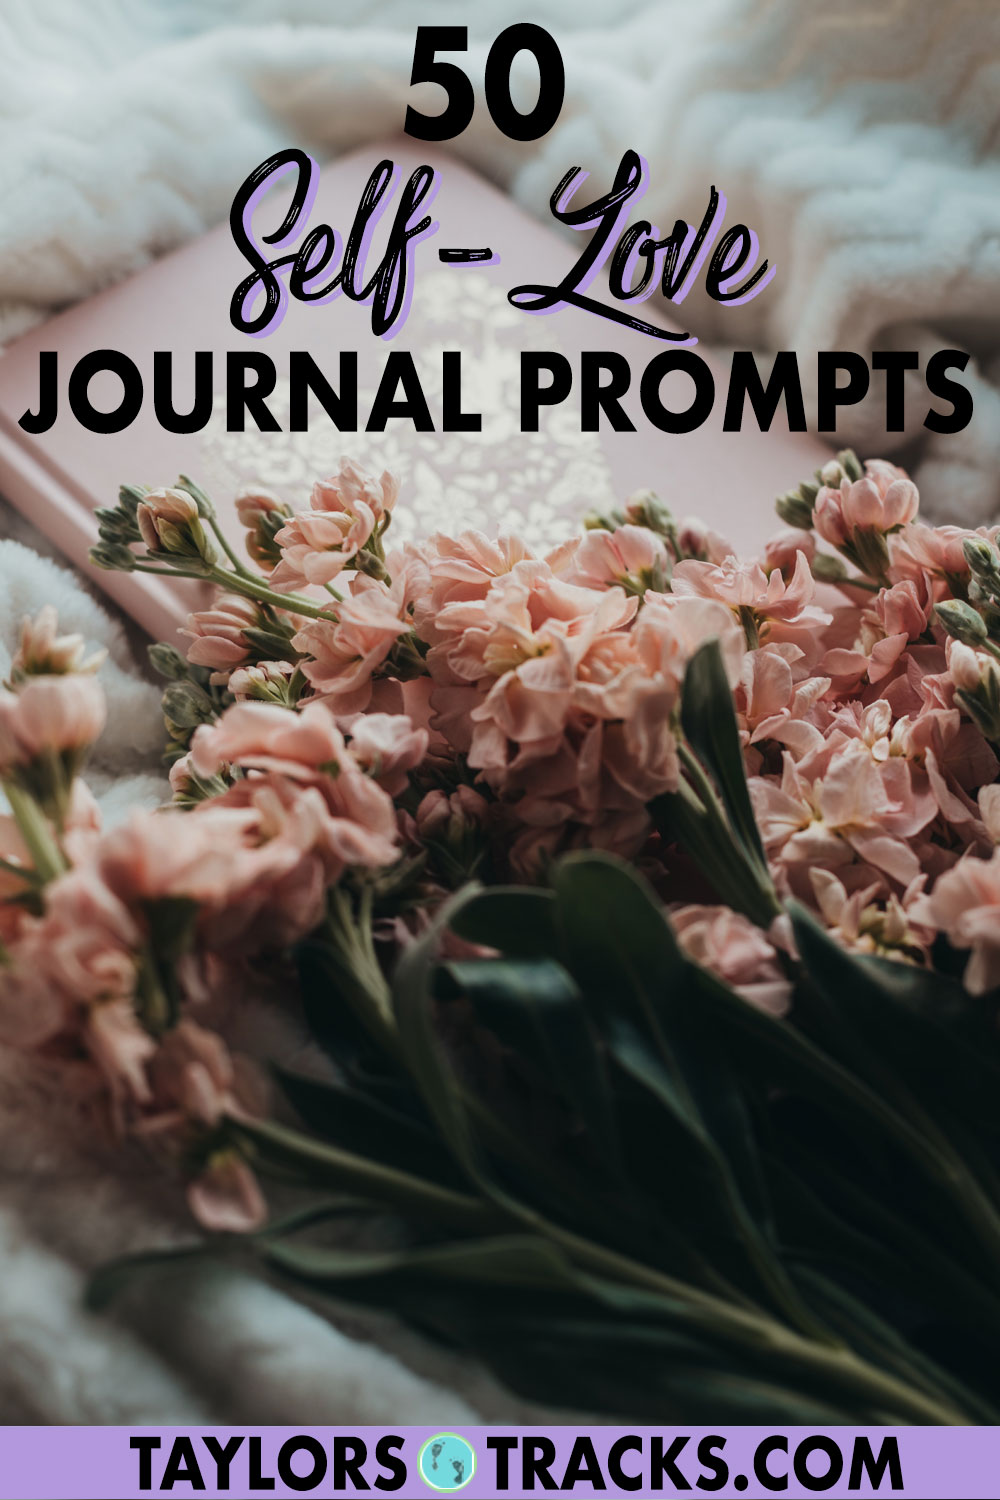 These self-love journal prompts are designed to help you gain more self-awareness through acceptance, forgiveness and self-discovery. Boost your confidence and self-worth too with these self-love journal ideas. Click to start journaling!